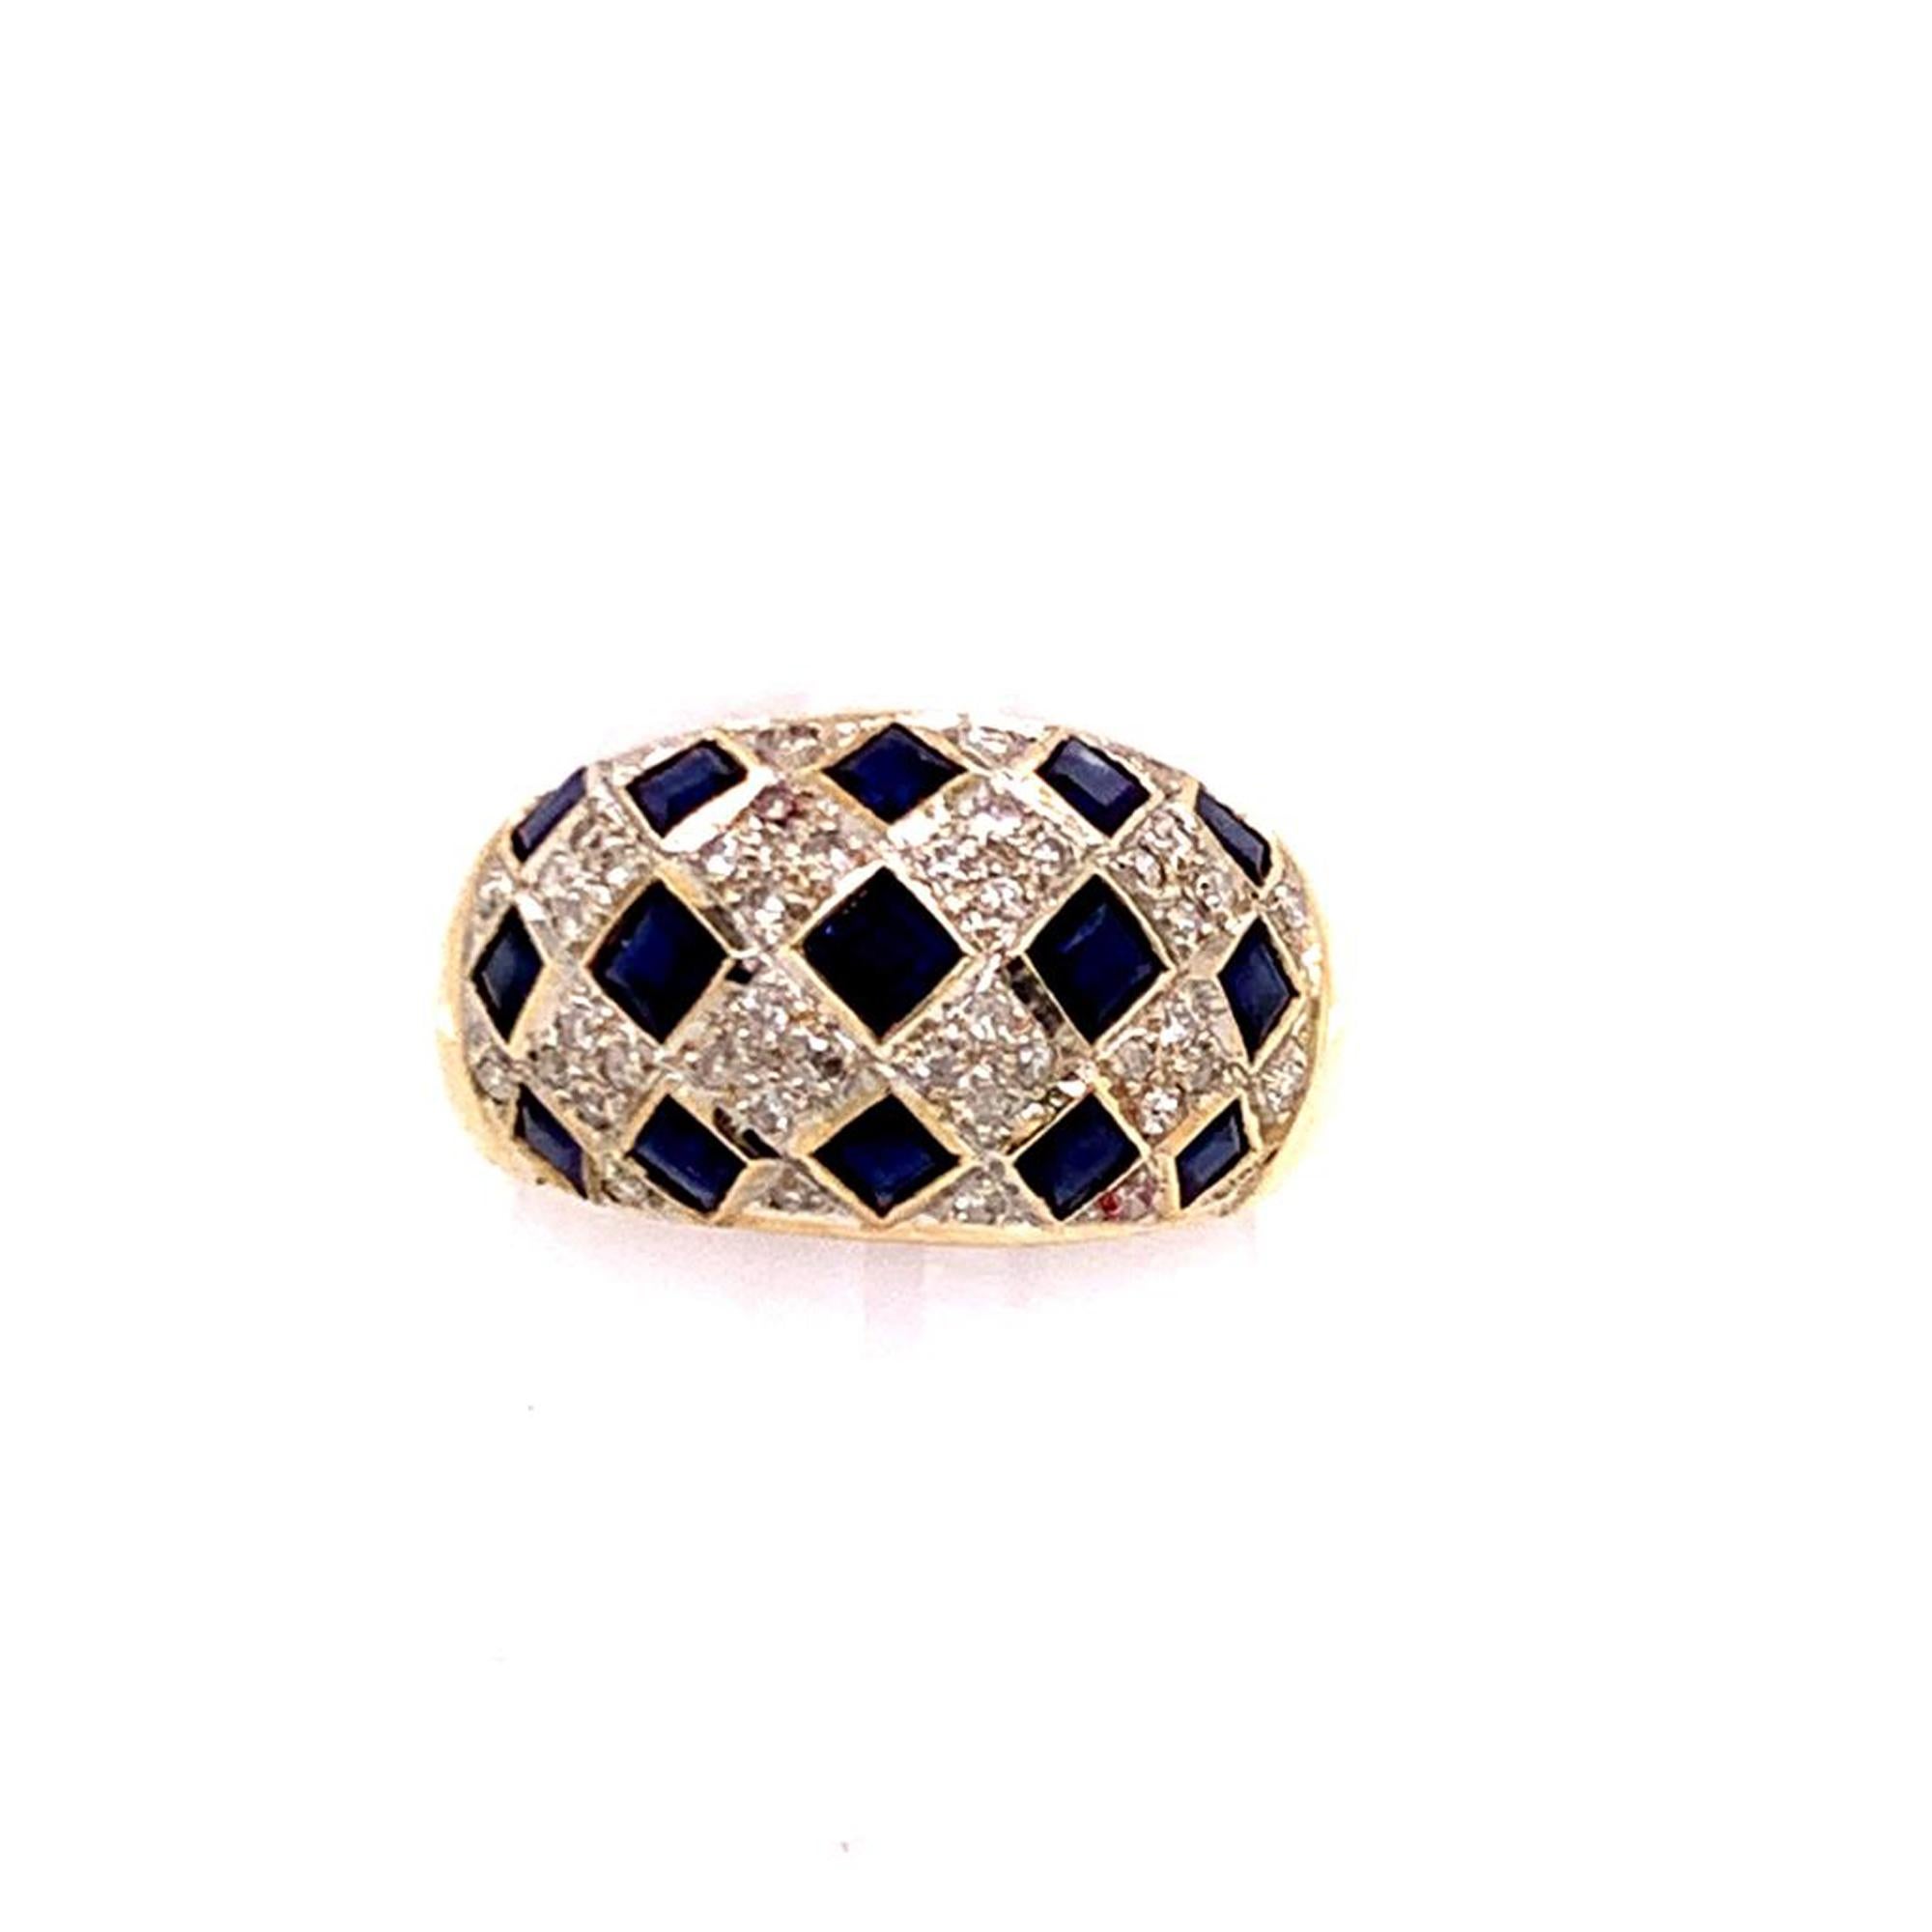 Square Cut Diamond Sapphire Ring 14k Yellow Gold 2.14 TCW Checkerboard Certified For Sale